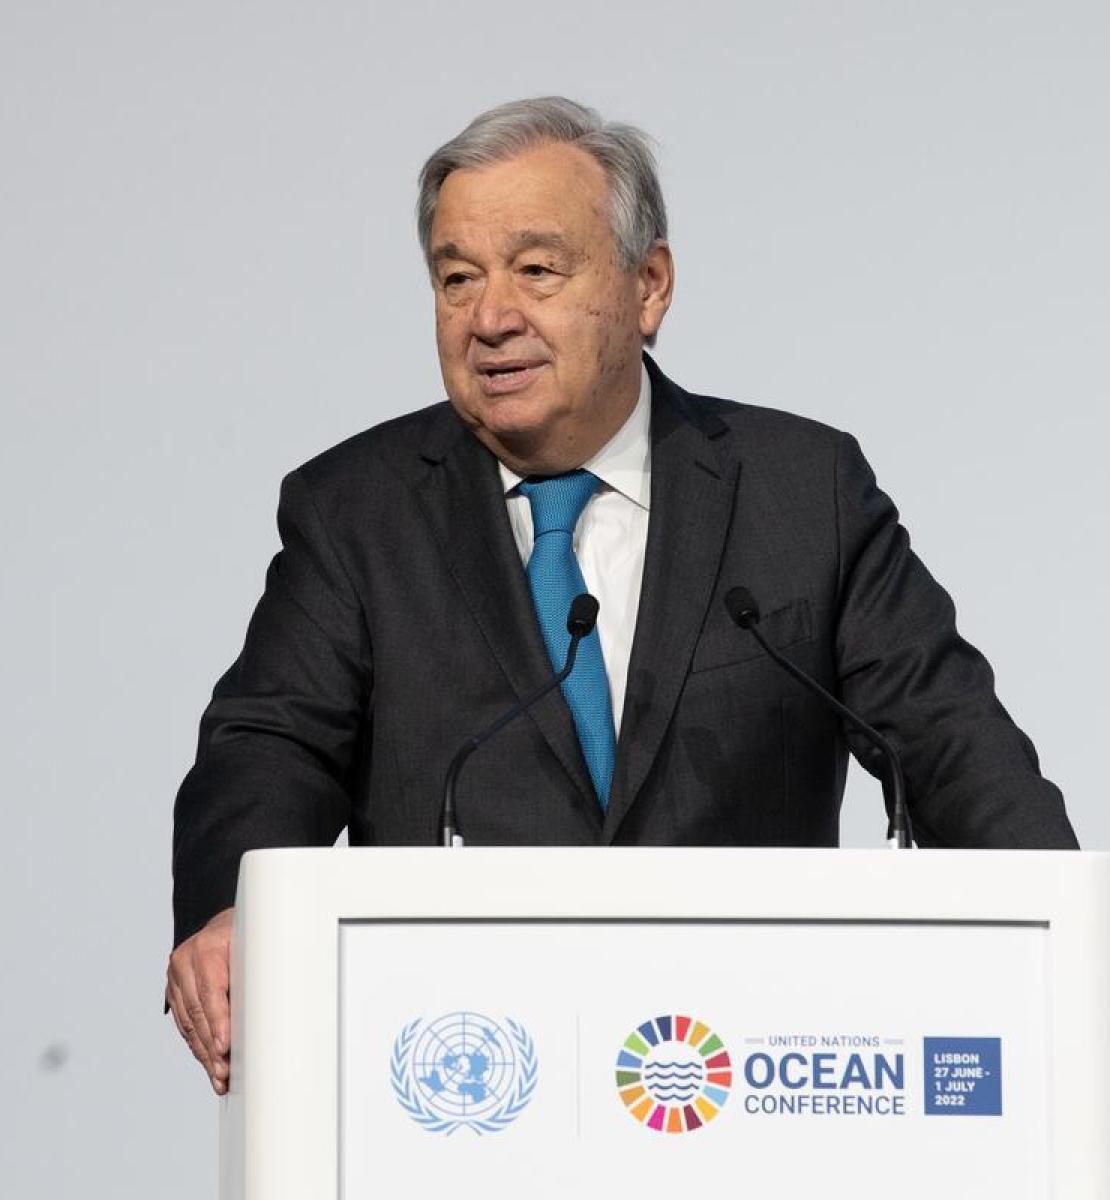 A man in a suit speaks into a microphone and a podium with UN logos on it, against a grey wall. 